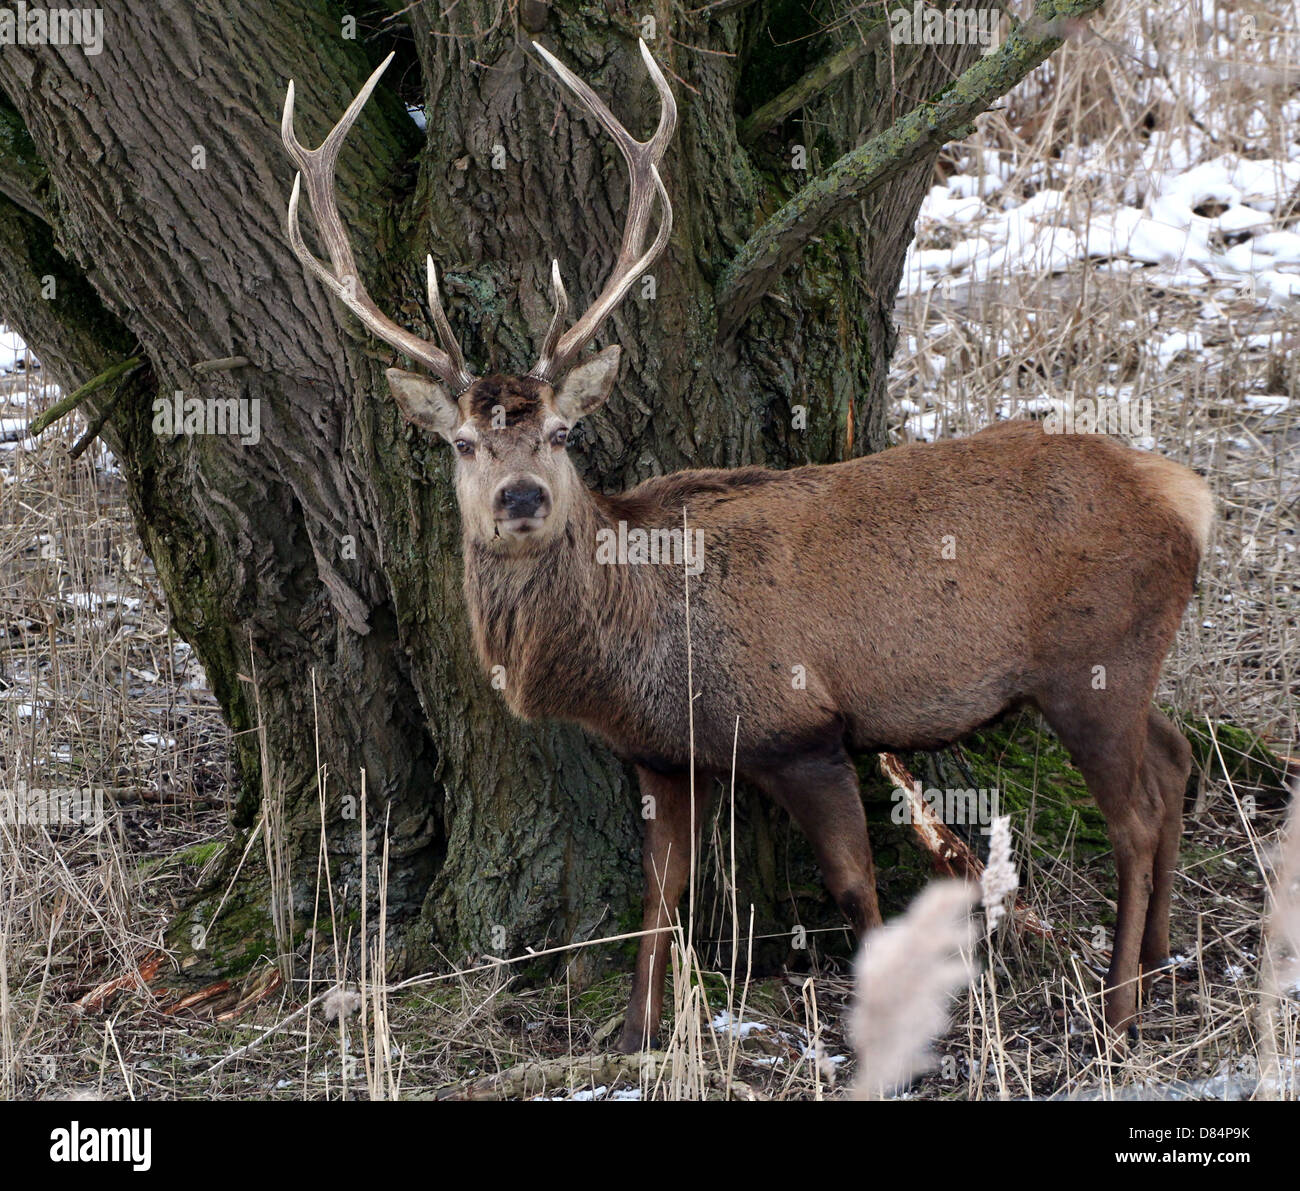 Close-up of a mature antlered  Red Deer stag (Cervus elaphus) in a winter setting Stock Photo